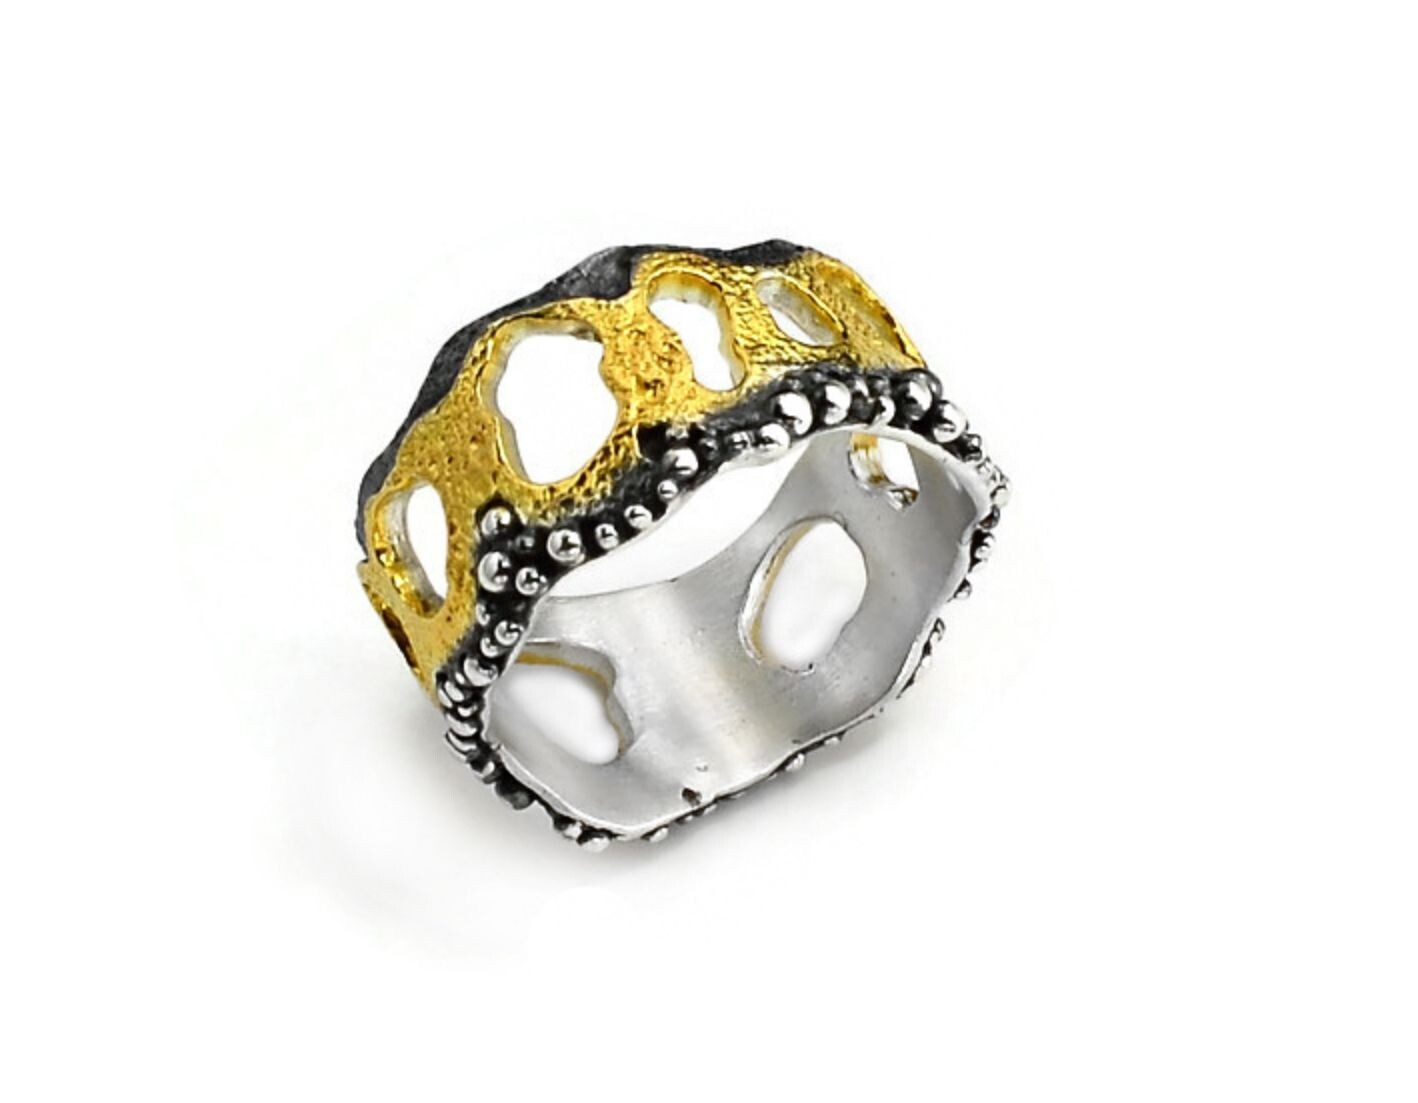 Organic style contemporary ring